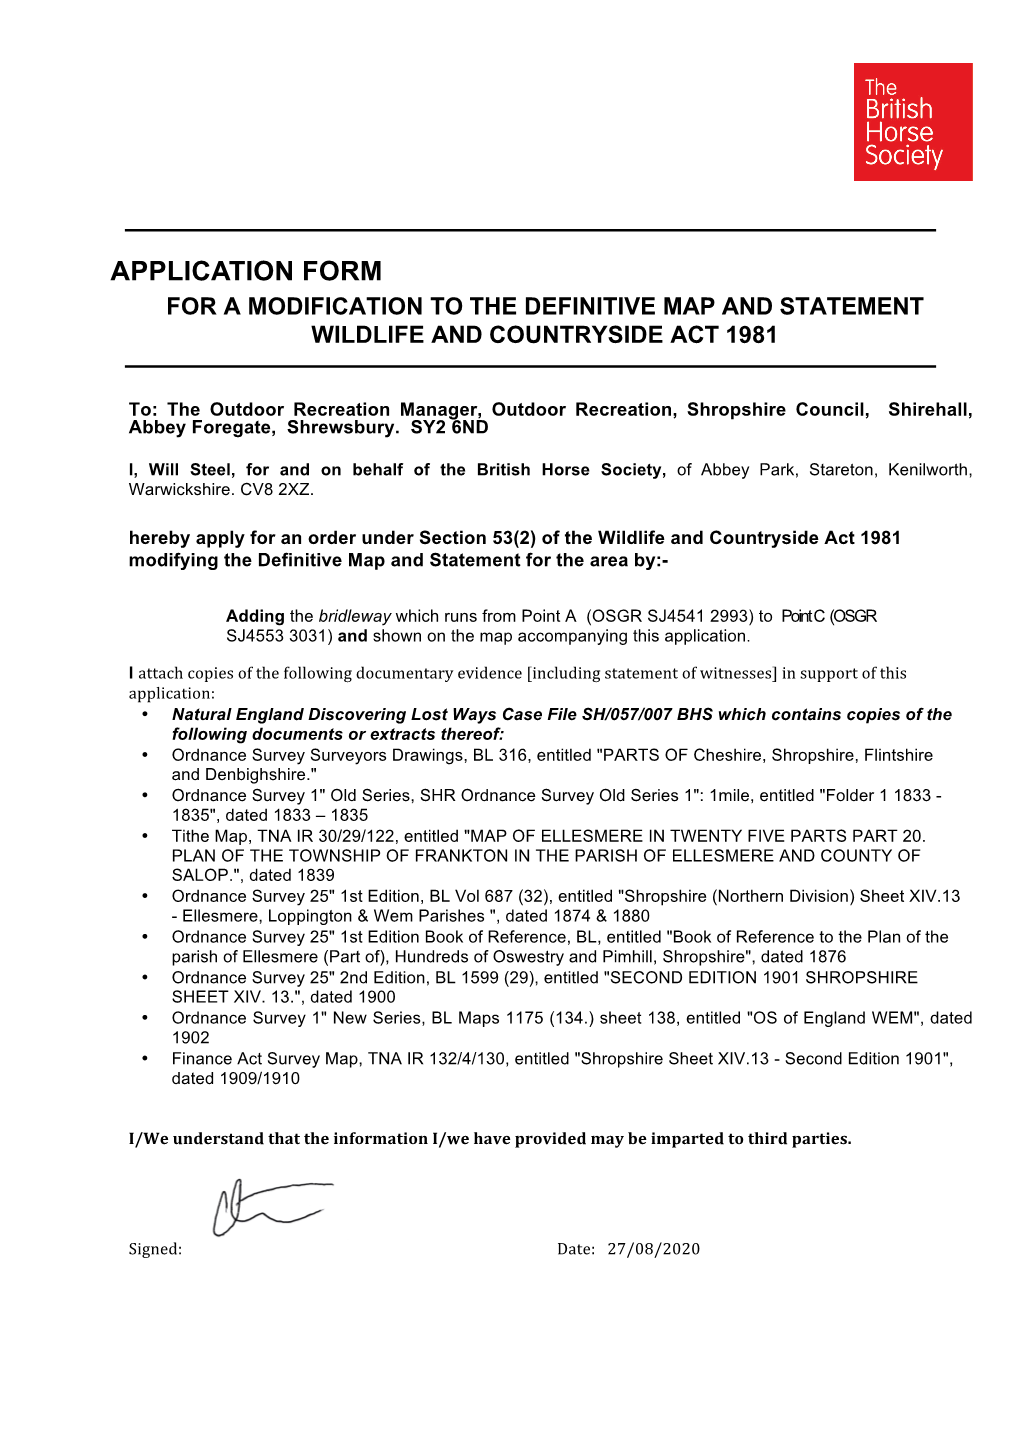 Application Form for a Modification to the Definitive Map and Statement Wildlife and Countryside Act 1981